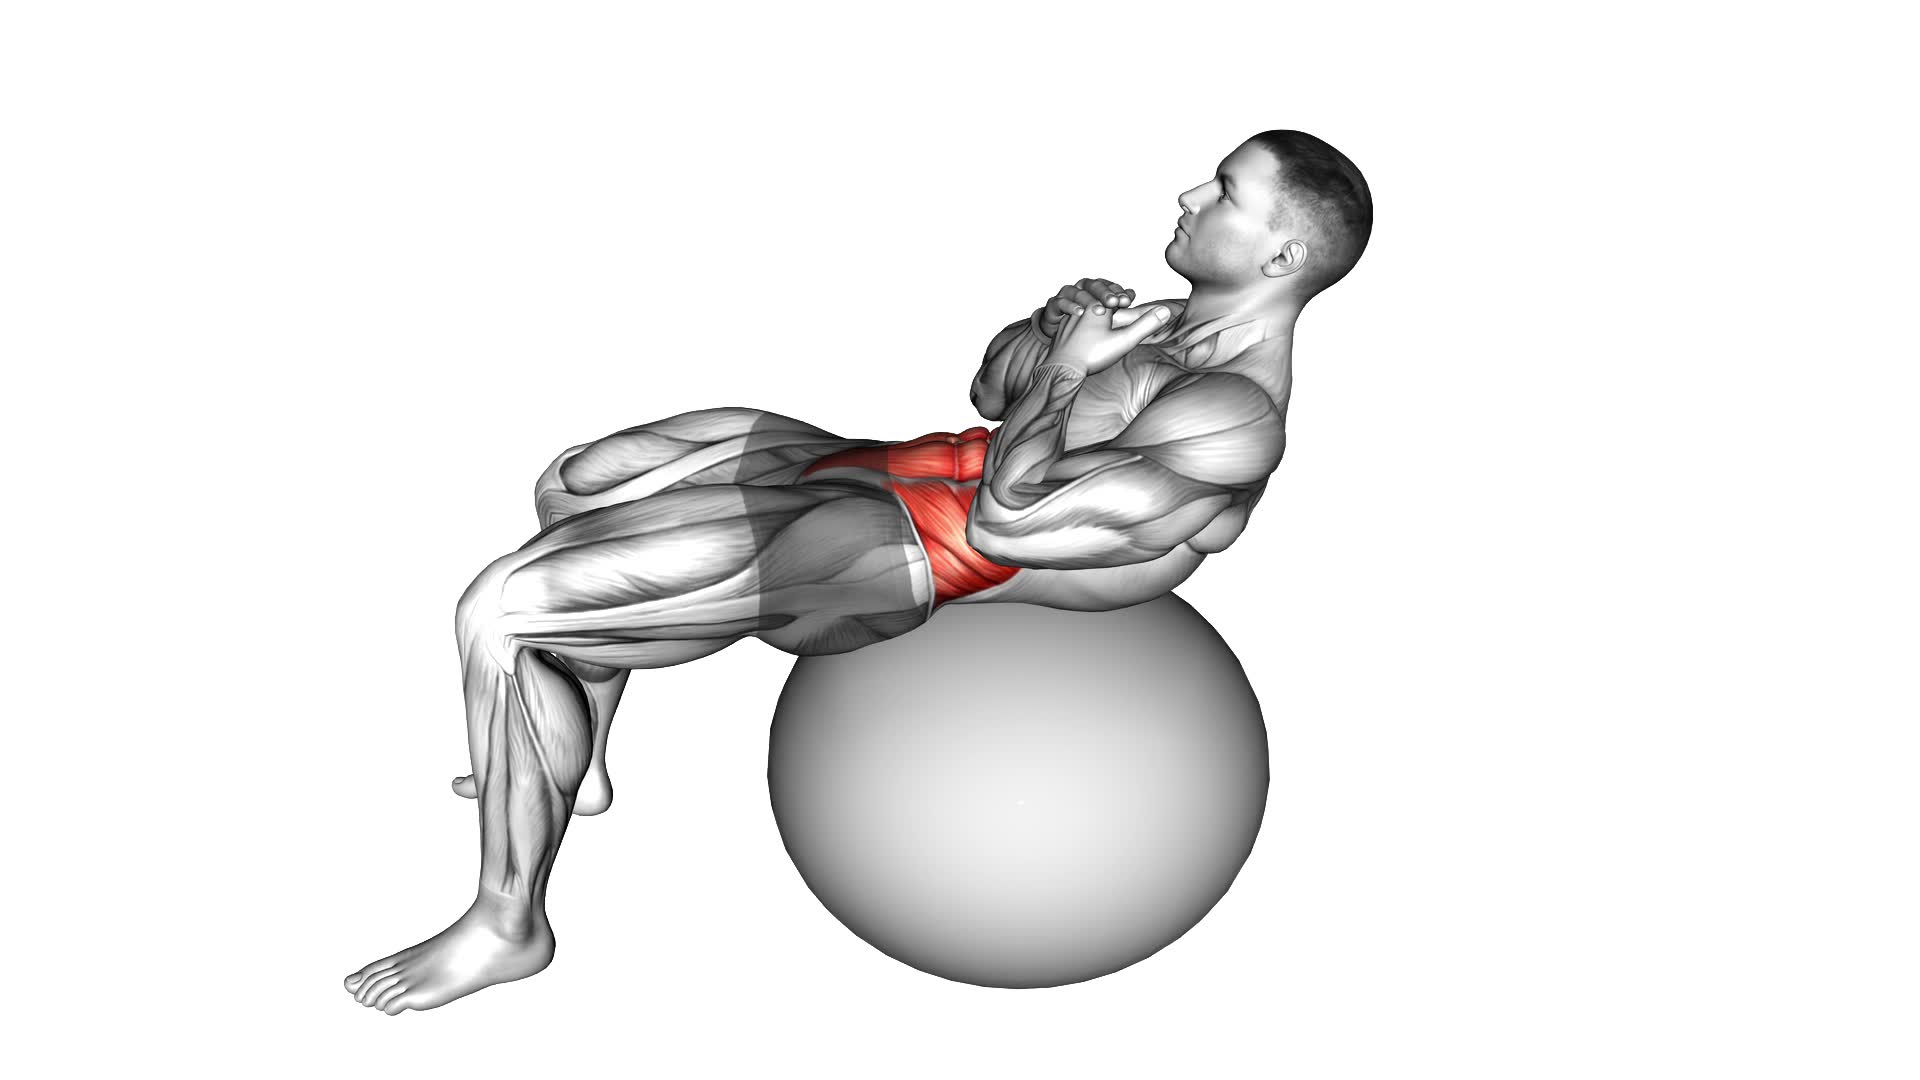 Crunch (On Stability Ball) - Video Exercise Guide & Tips